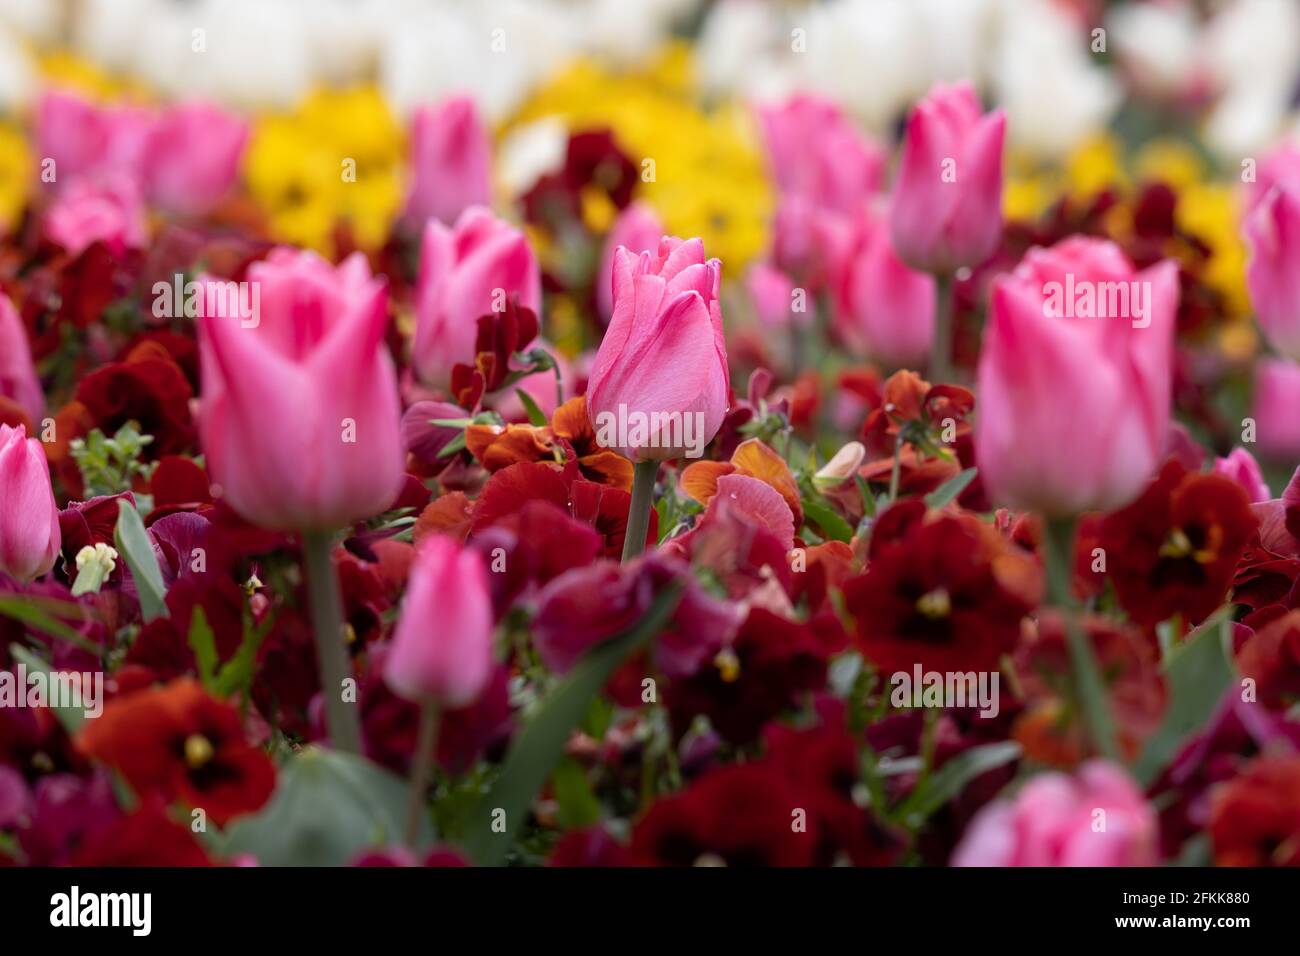 colorful fresh pink tulips in a bed of spring flowers blurred background Stock Photo